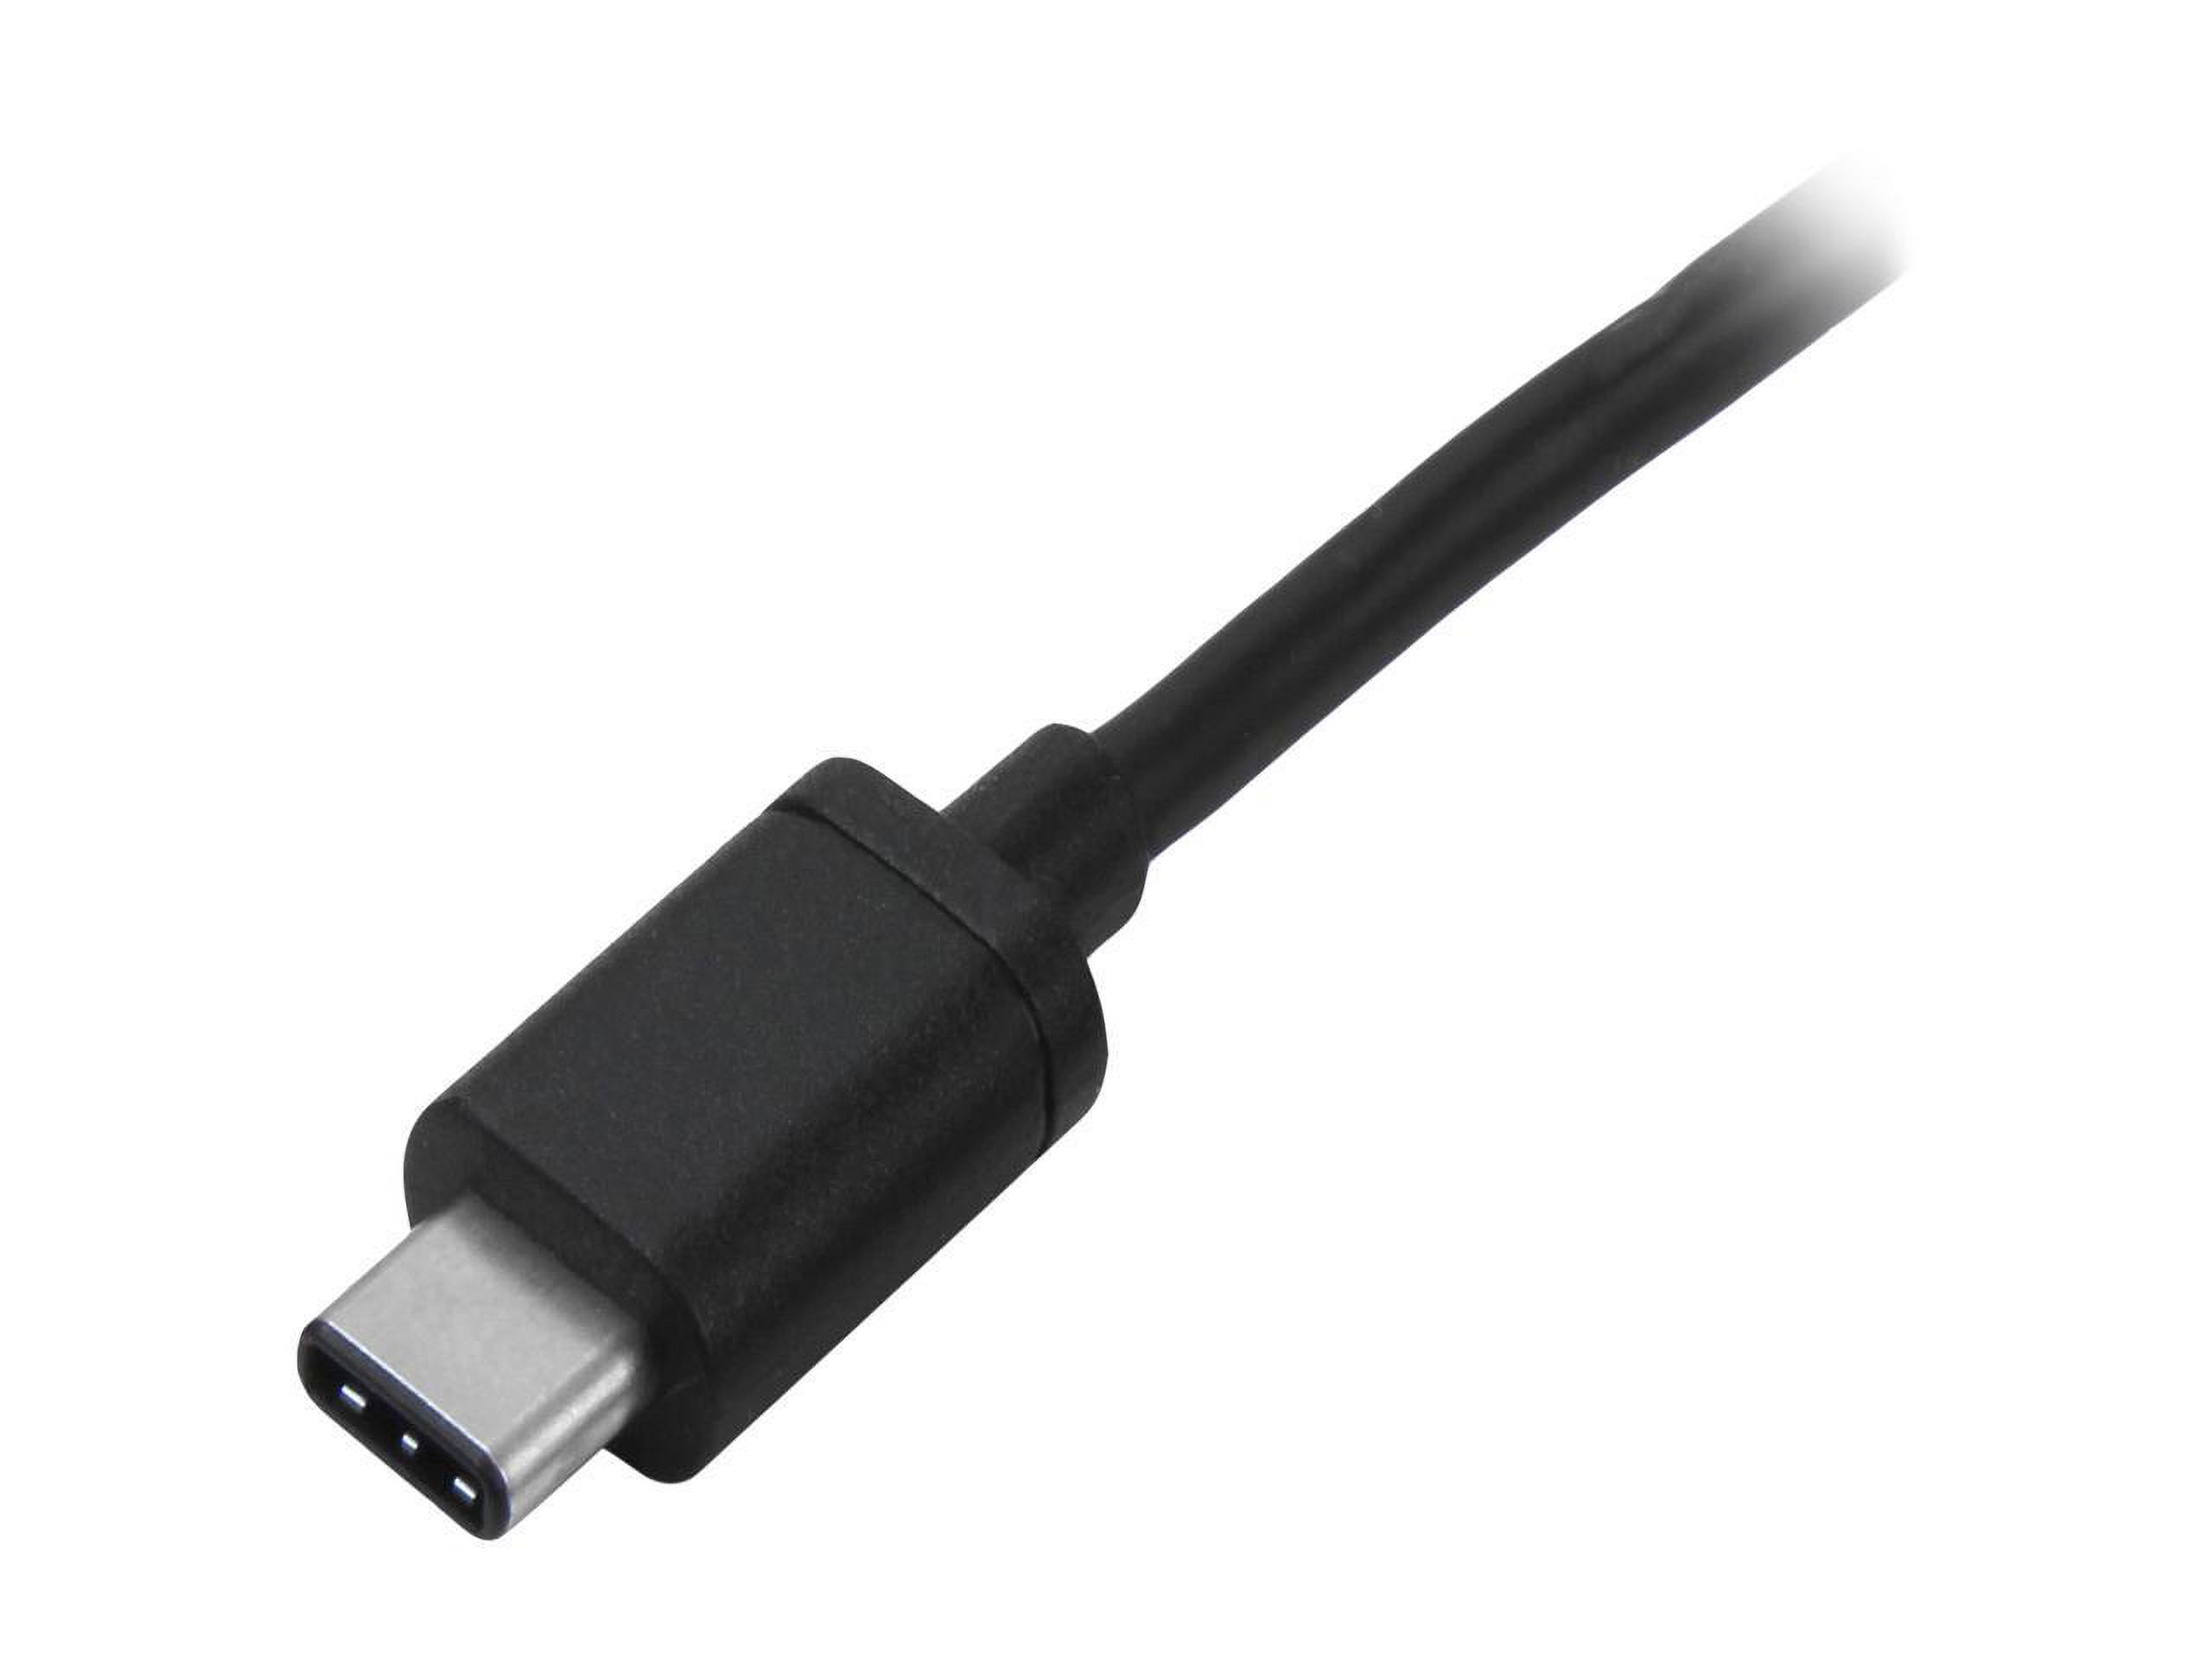 StarTech.com USB2CC2M 2m 6 ft USB C Cable - M/M - USB 2.0 - USB-IF Certified - USB-C Charging Cable - USB 2.0 Type C Cable - image 2 of 3